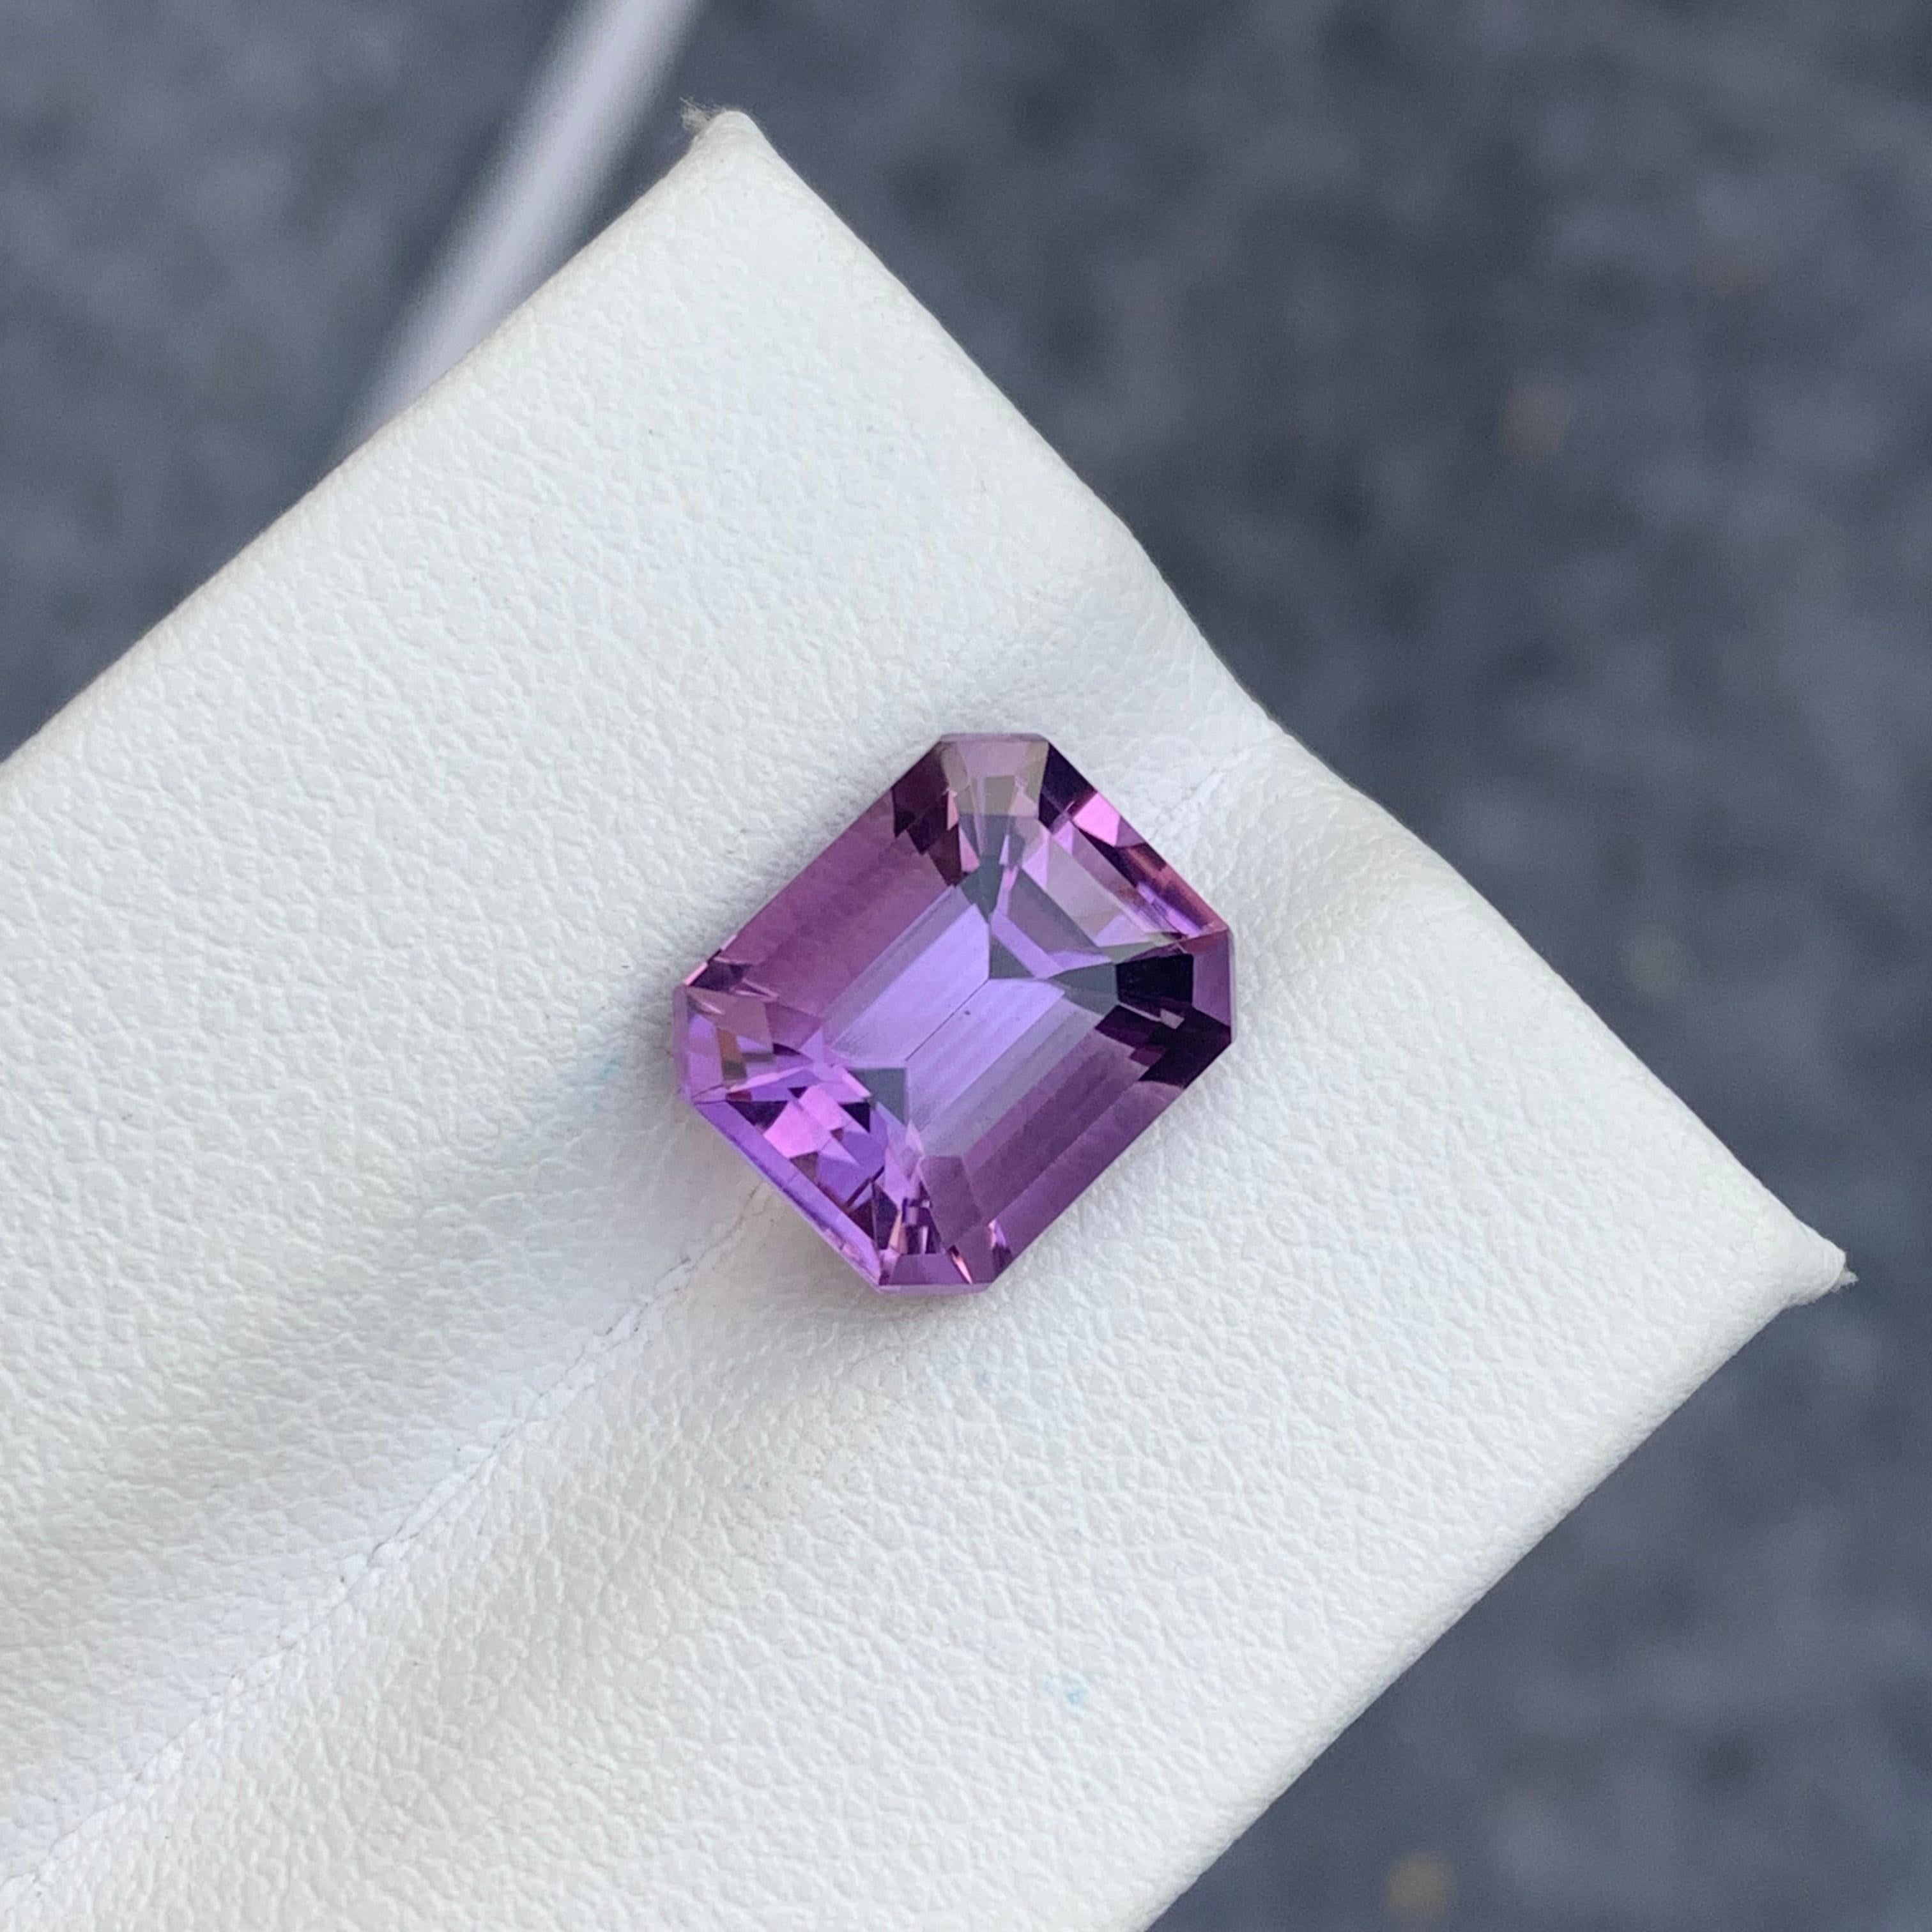 Gemstone Type : Amethyst
Weight : 4.0 Carats
Dimensions : 10.5x8.8x7 mm
Clarity : Eye Clean
Origin : Brazil
Color: Purple
Shape: Emerald 
Certificate: On Demand
Month: February

Purported amethyst powers for healing
enhancing the immune